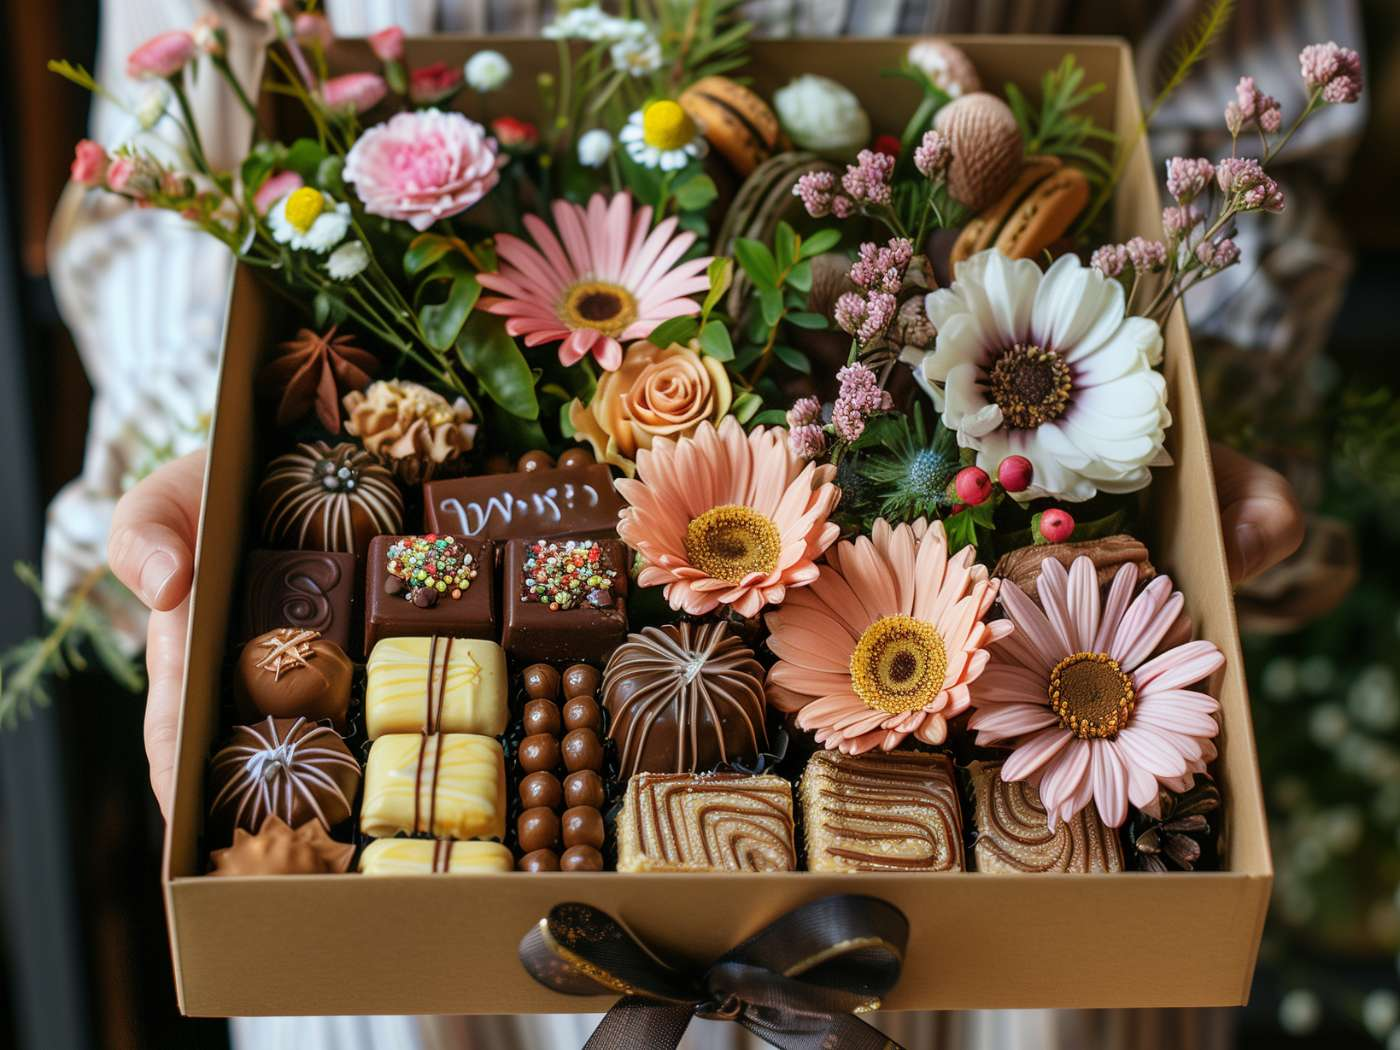 Luxurious Chocolate and Sweets Gift Box Collection featuring milk and white chocolate bars, vanilla accents, and a chocolate gift hamper, beautifully paired with Fabulous Flowers and Gifts, ideal for gifting.